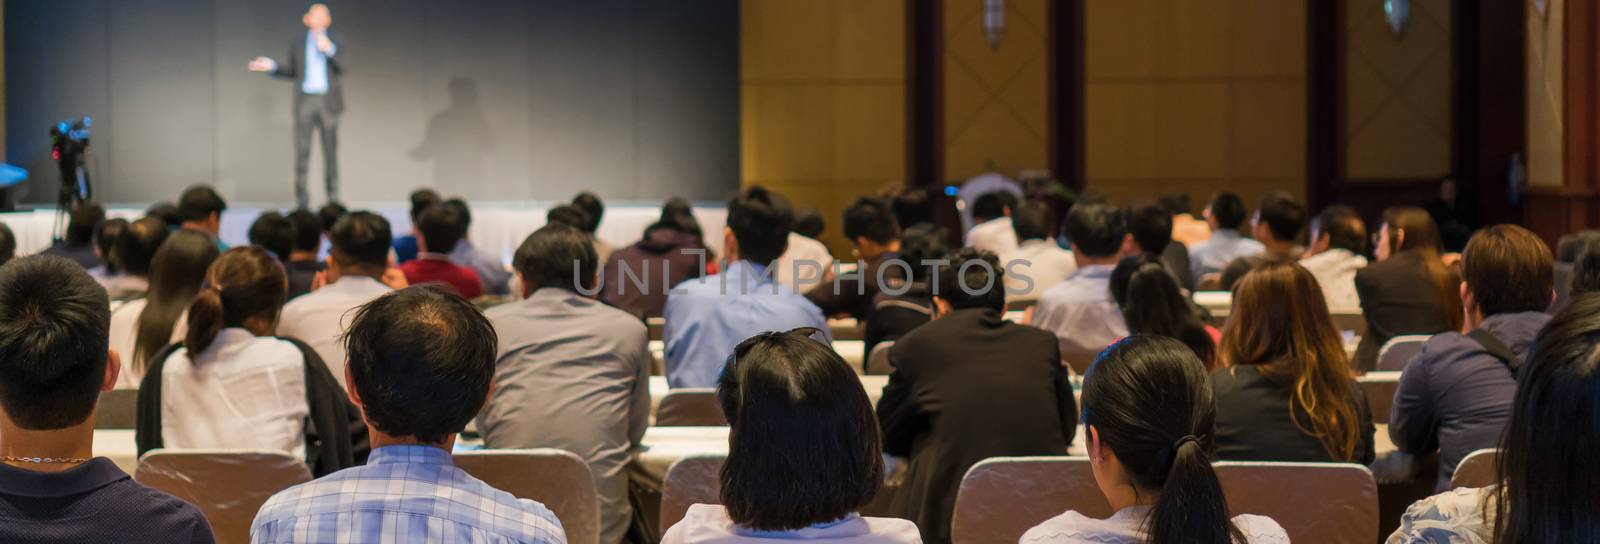 Banner and web page or cover template of Rear side of Audiences sitting and listening the speackers on the stage in low light conference hall, event and seminar concept